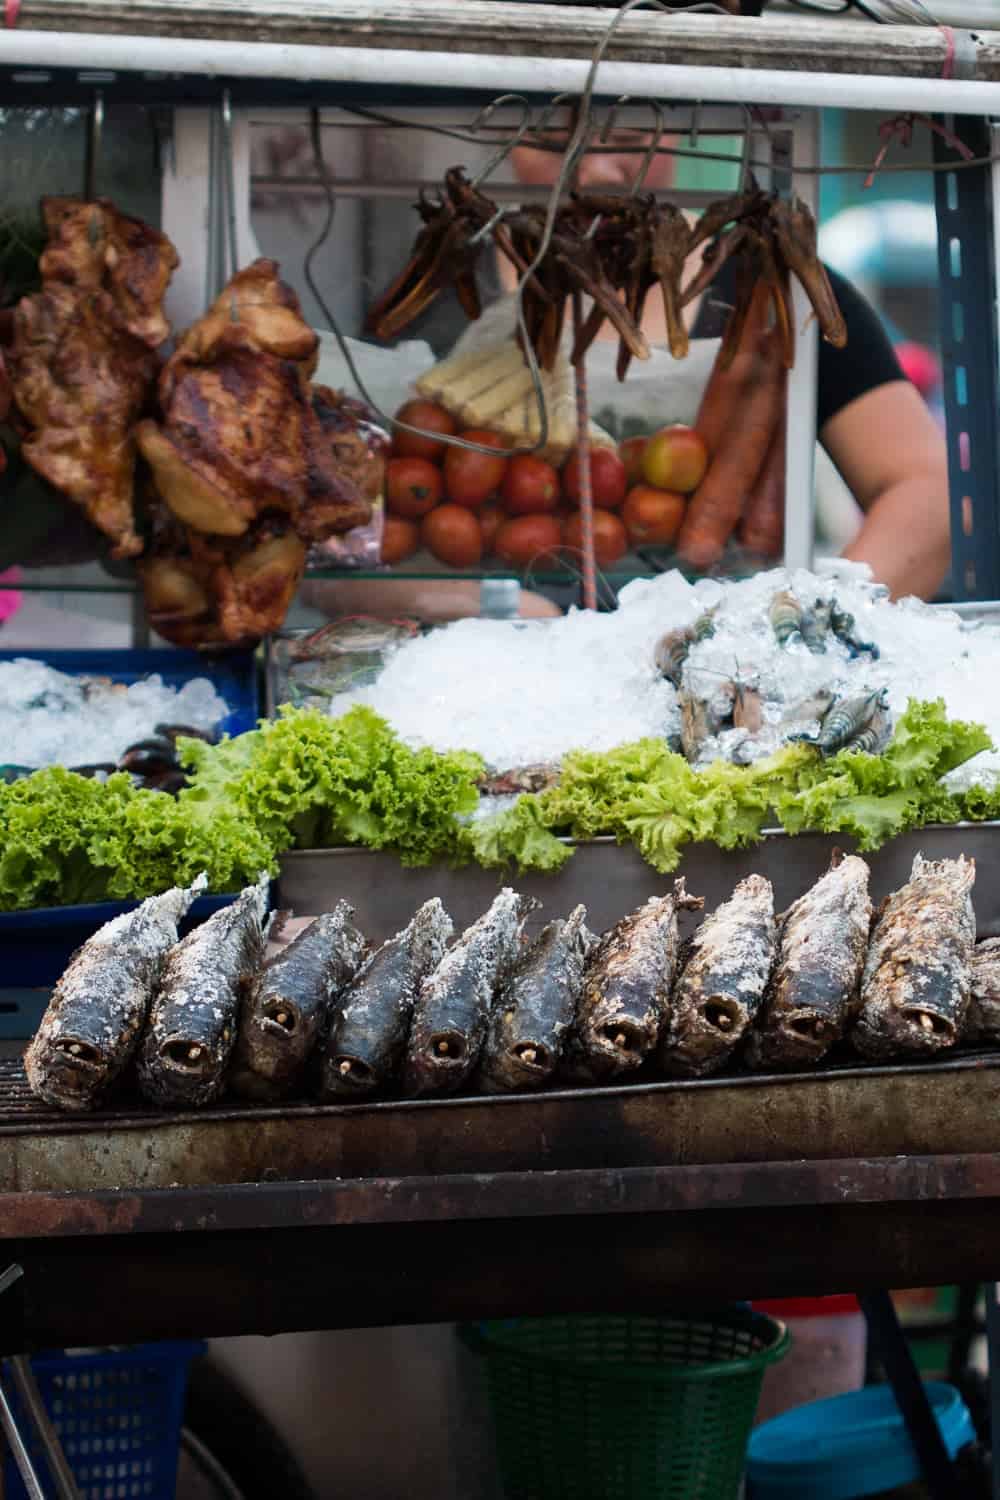 Fish, chicken, some greens and tomato placed on a street food cart